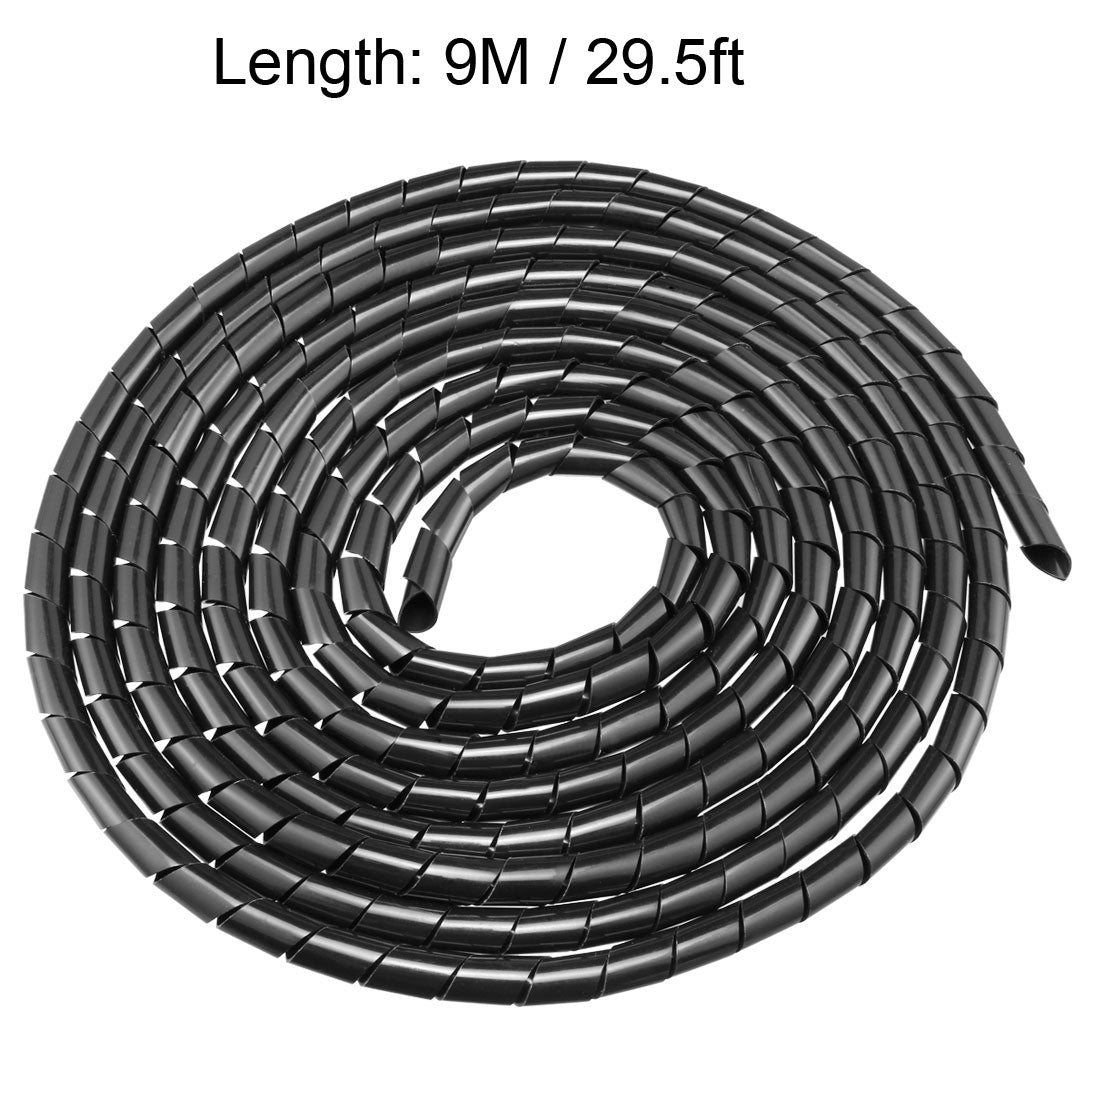 uxcell Uxcell 10mm Flexible Spiral Tube Cable Wire Wrap Computer Manage Cord 9M Length Black